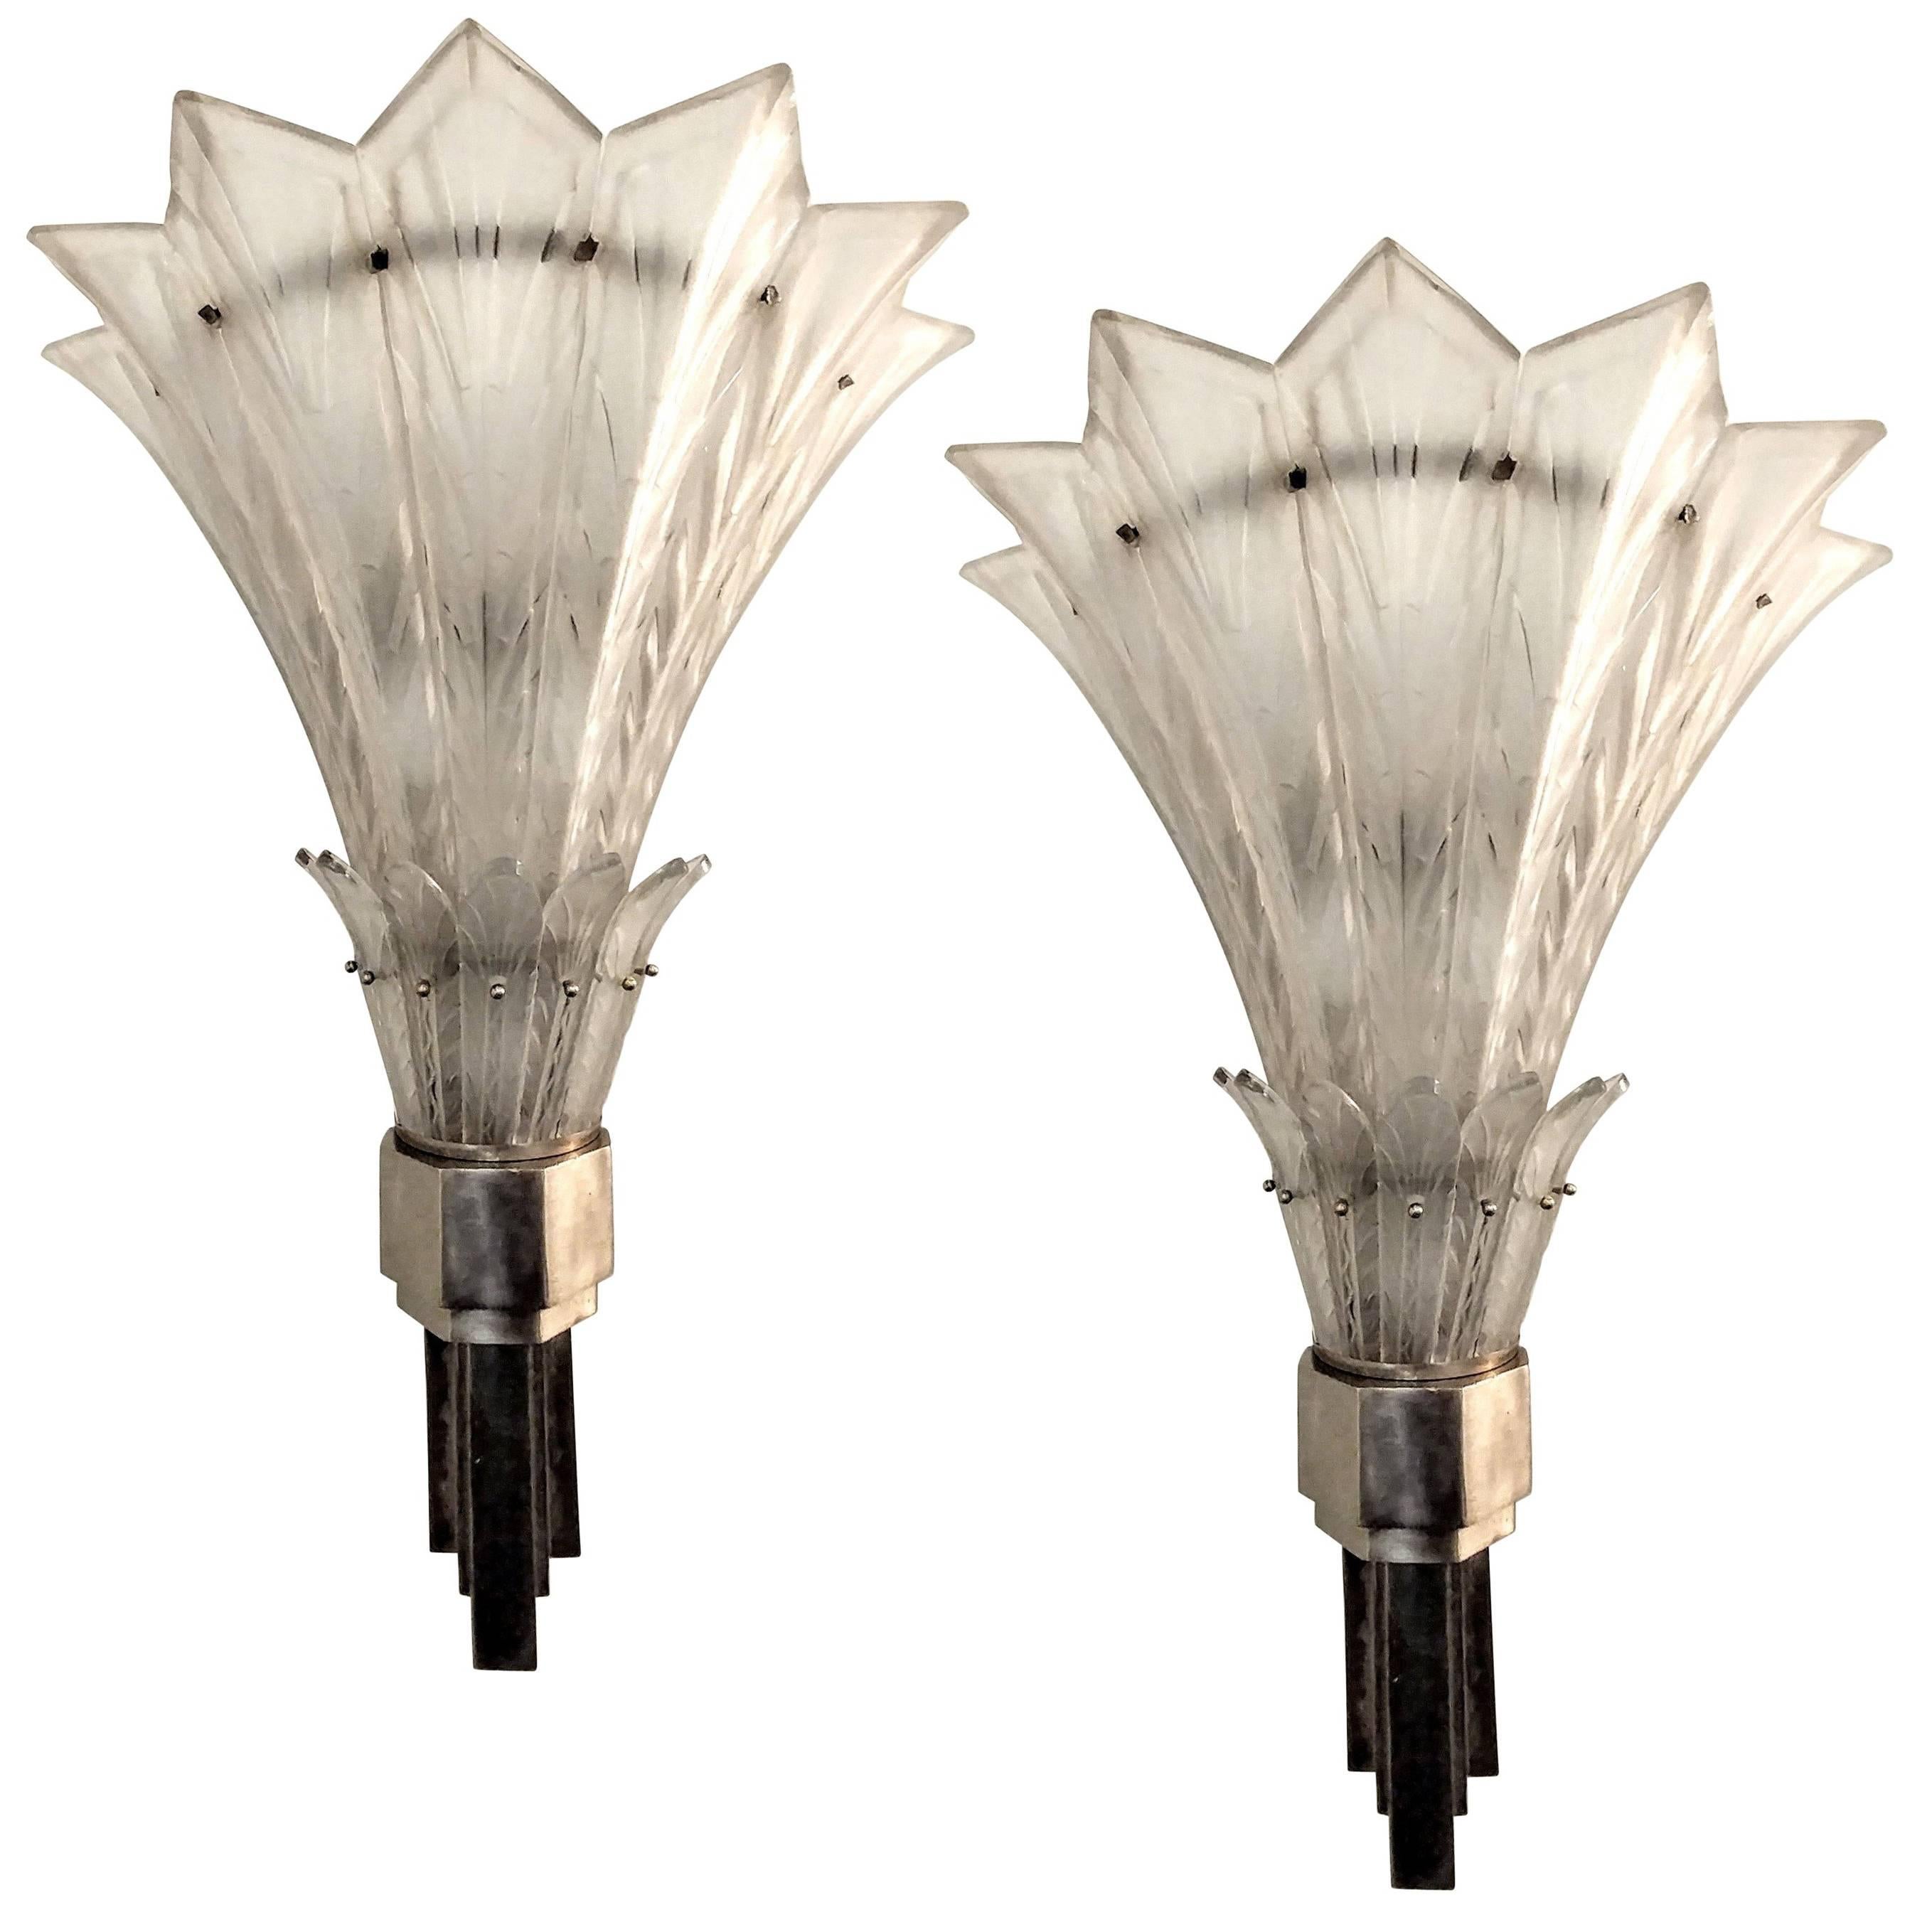 A single French Art Deco rare two-tier wall sconce was created in the 1930's by 